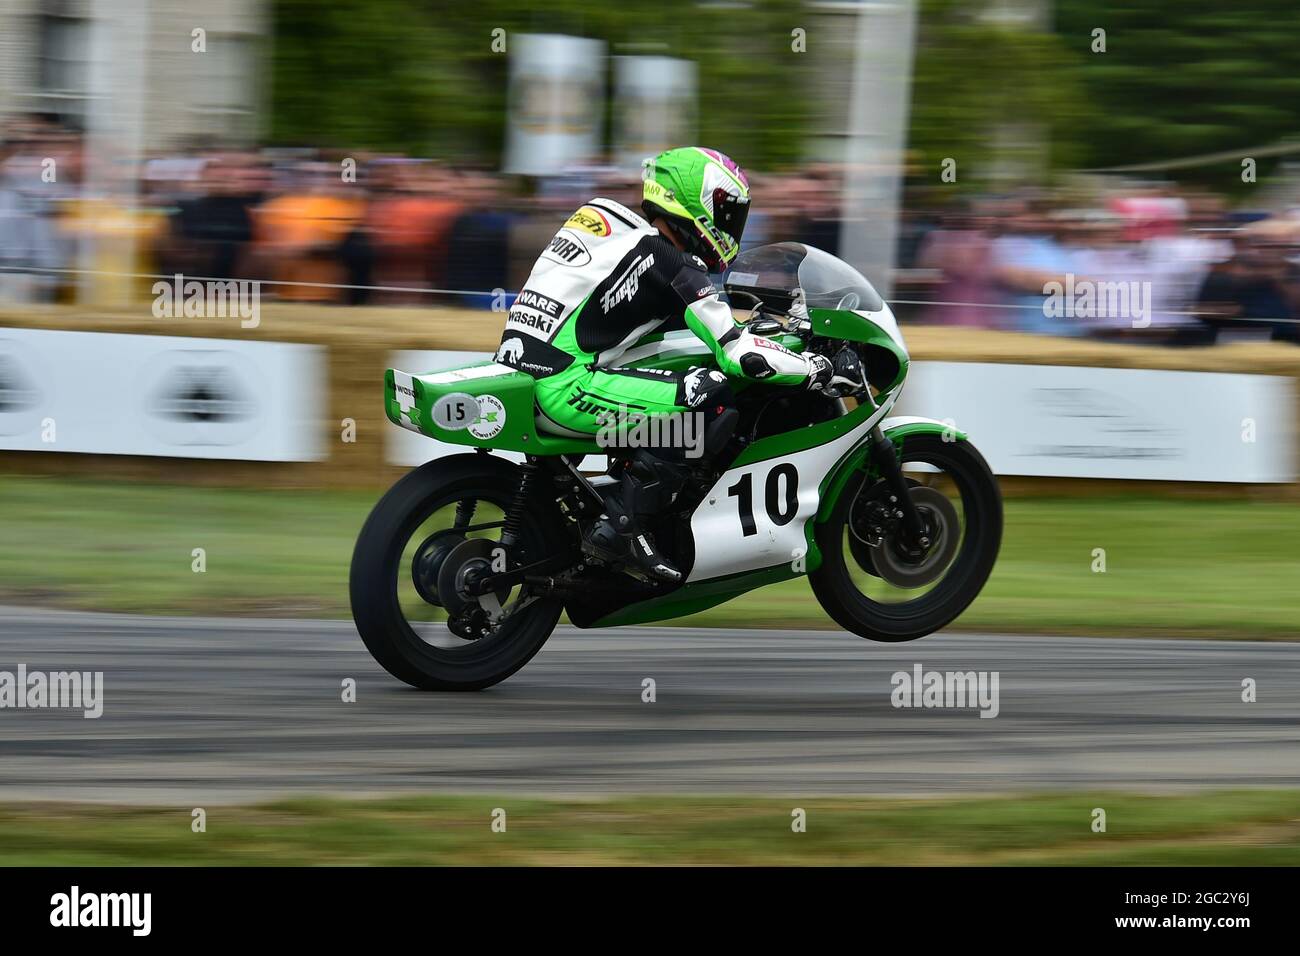 Pulling a wheelie outside Goodwood House, Chris Wilson, Kawasaki KR750, 110 Years of the Mountain Course, The Maestros - Motorsport's Great All-Rounde Stock Photo